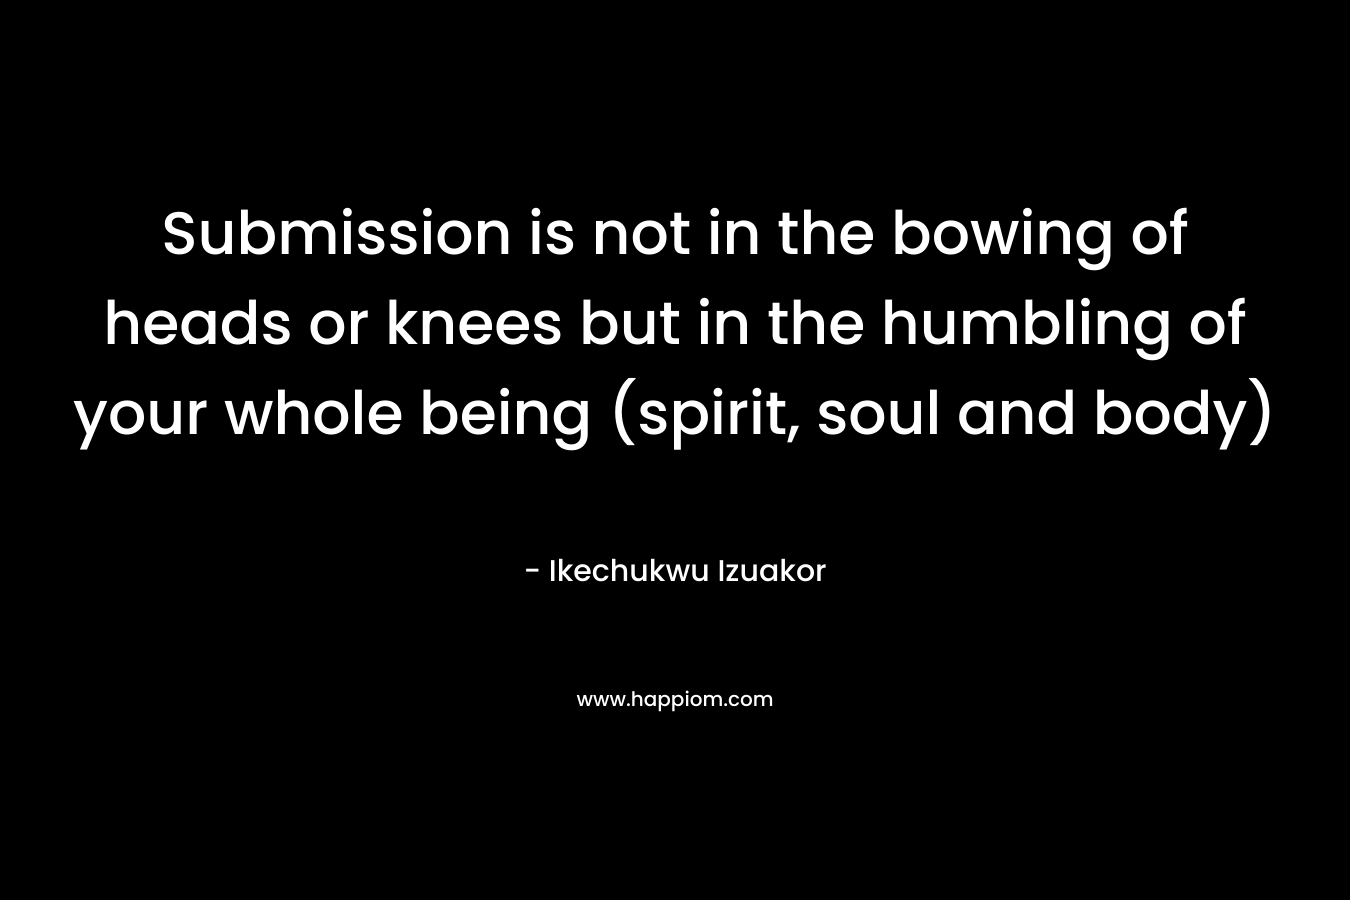 Submission is not in the bowing of heads or knees but in the humbling of your whole being (spirit, soul and body)